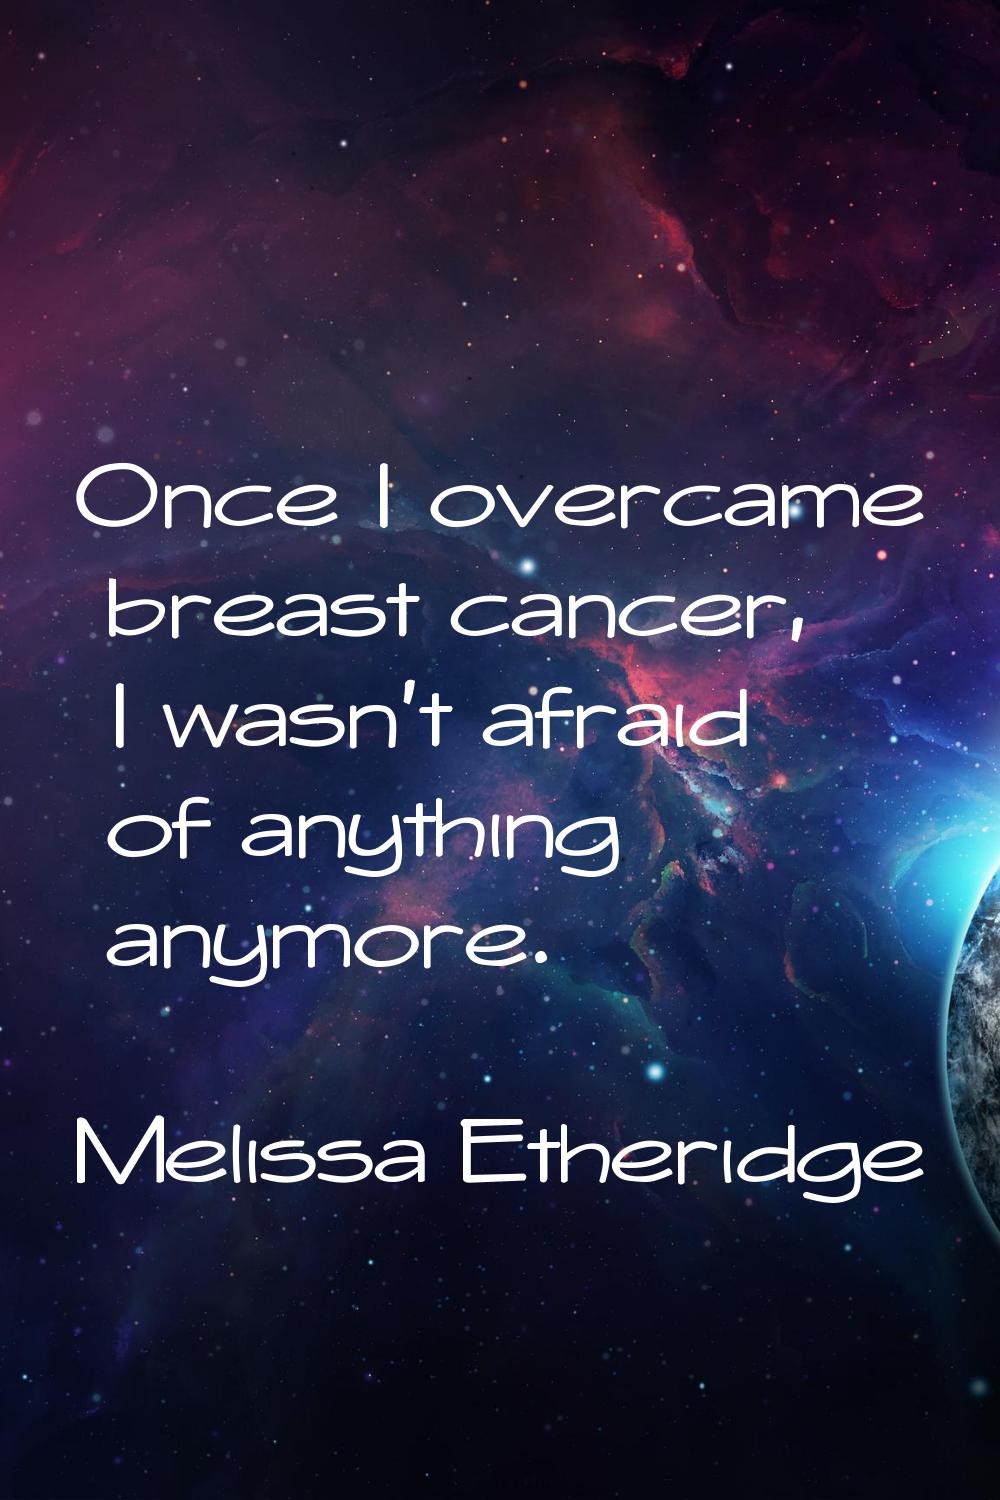 Once I overcame breast cancer, I wasn't afraid of anything anymore.